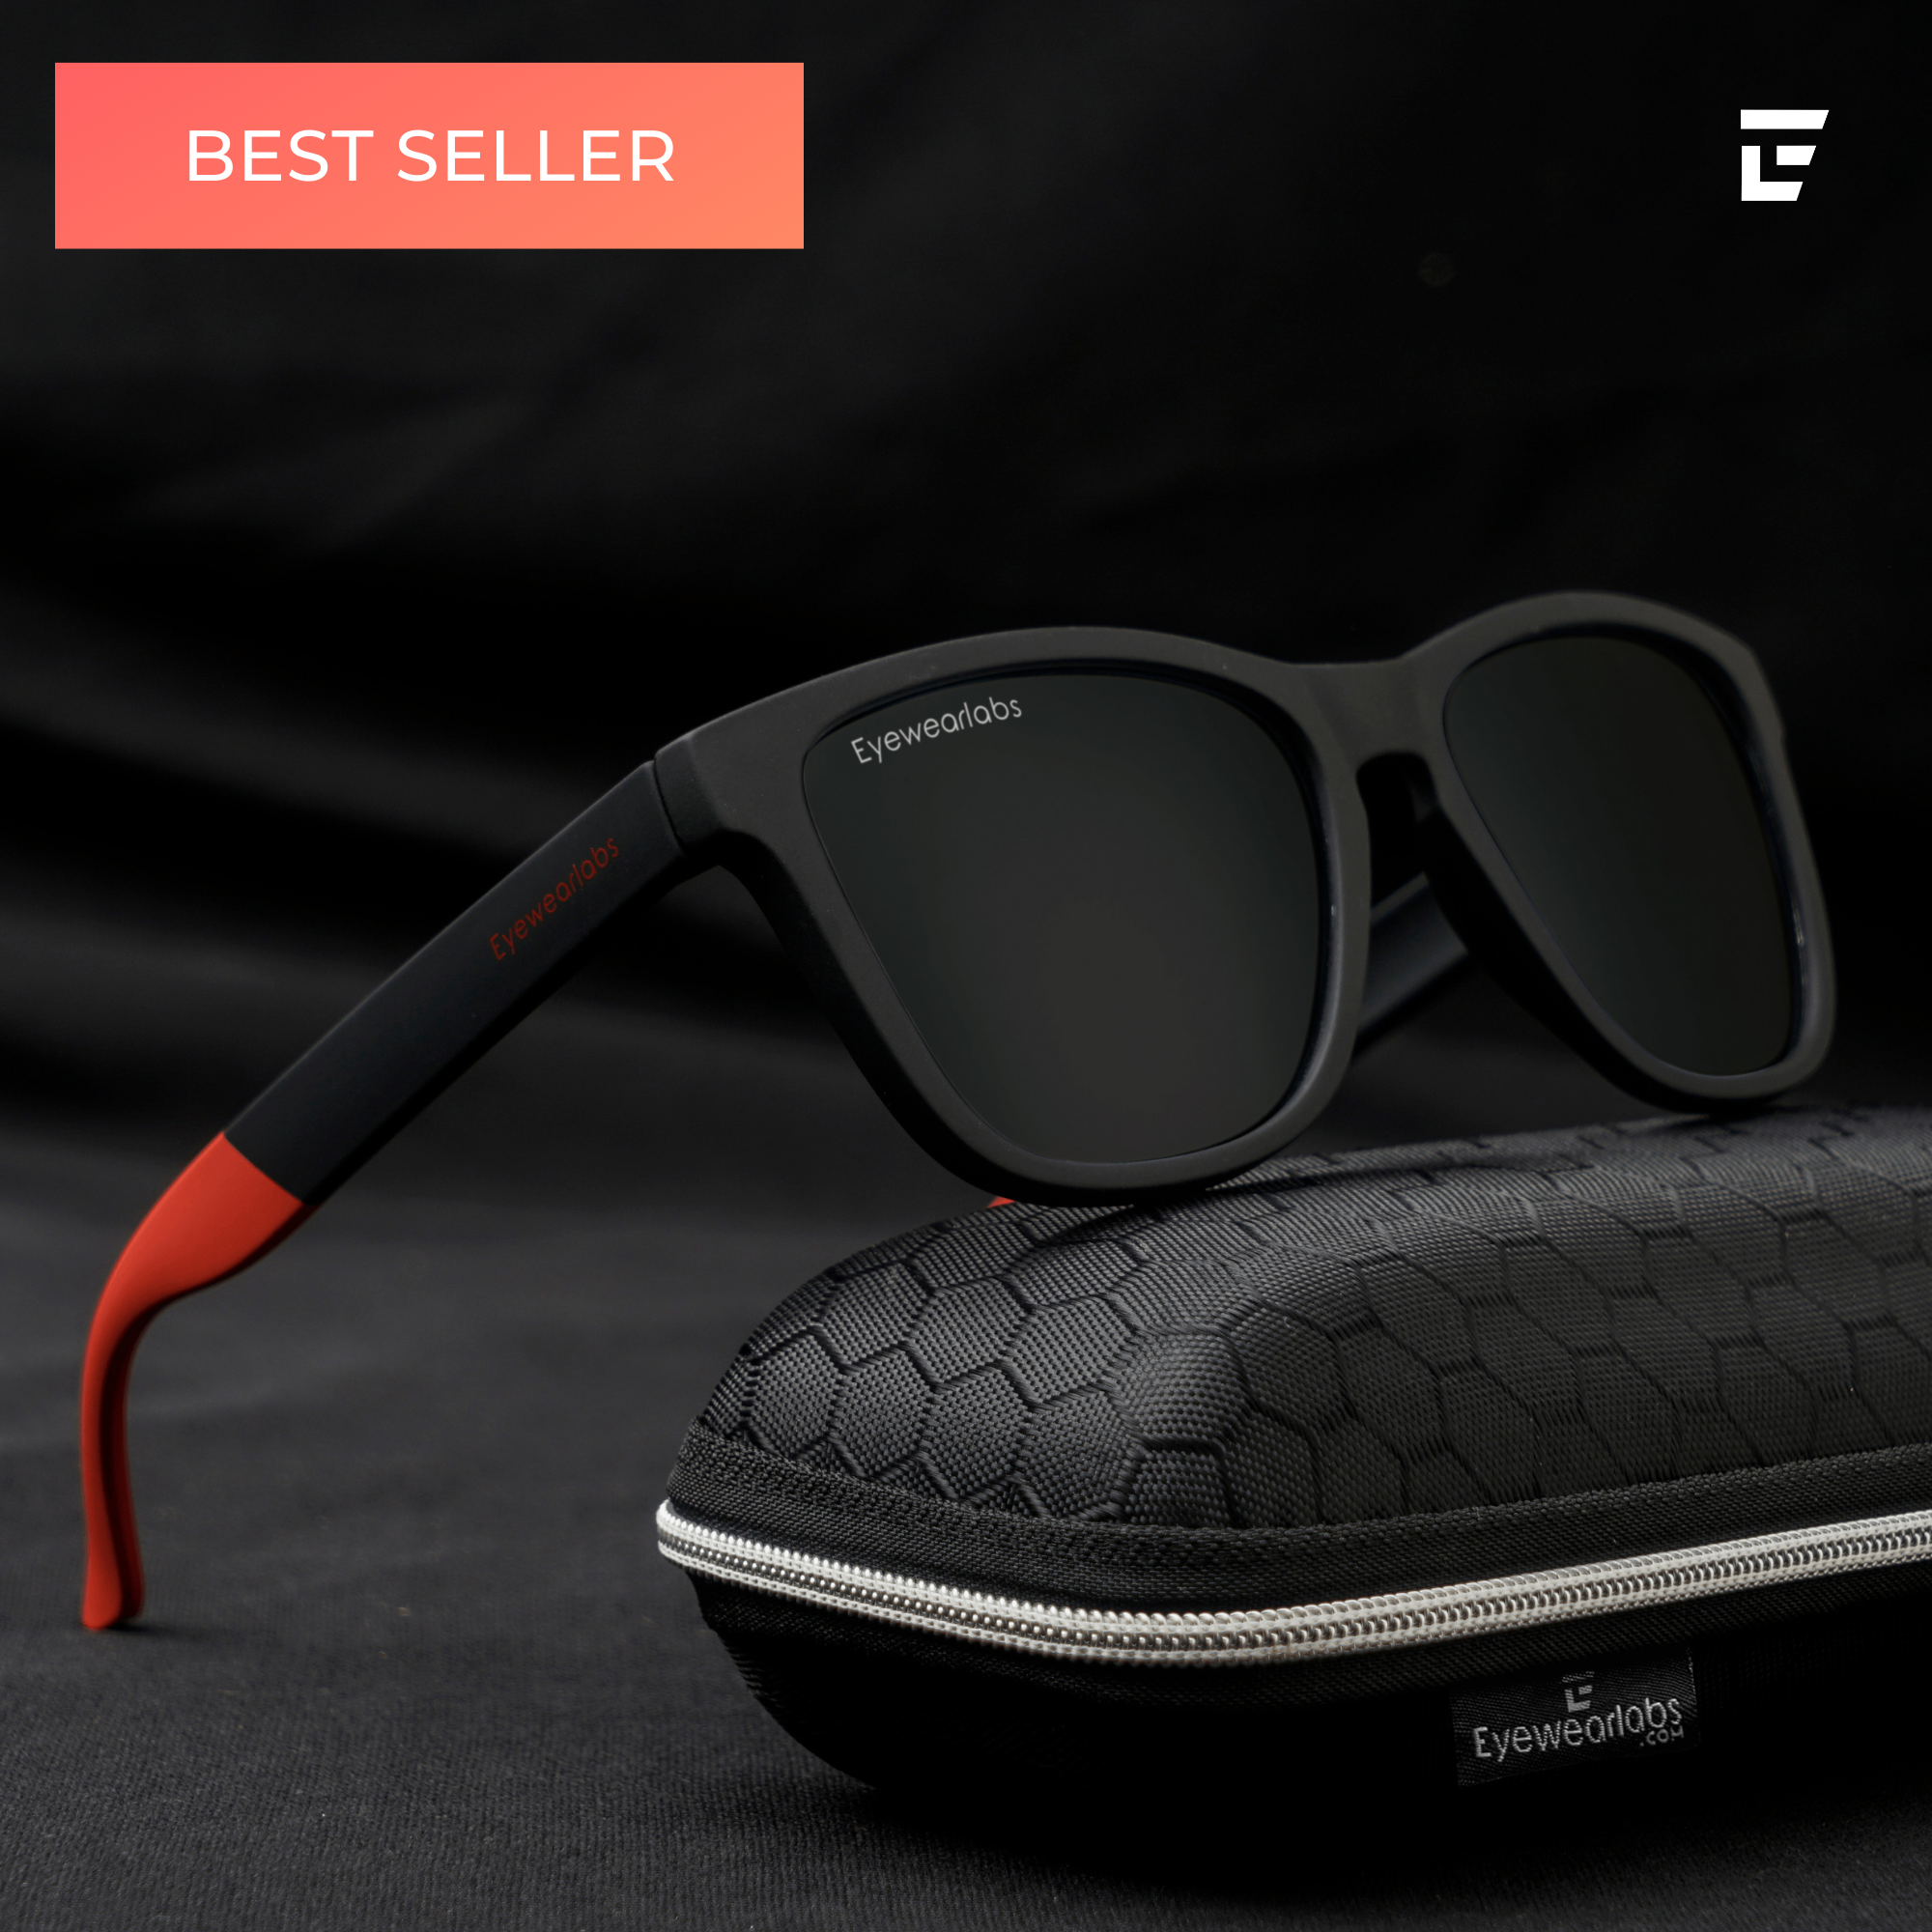 Buy Classic Rover Black Sunglasses for Men Online at Eyewearlabs